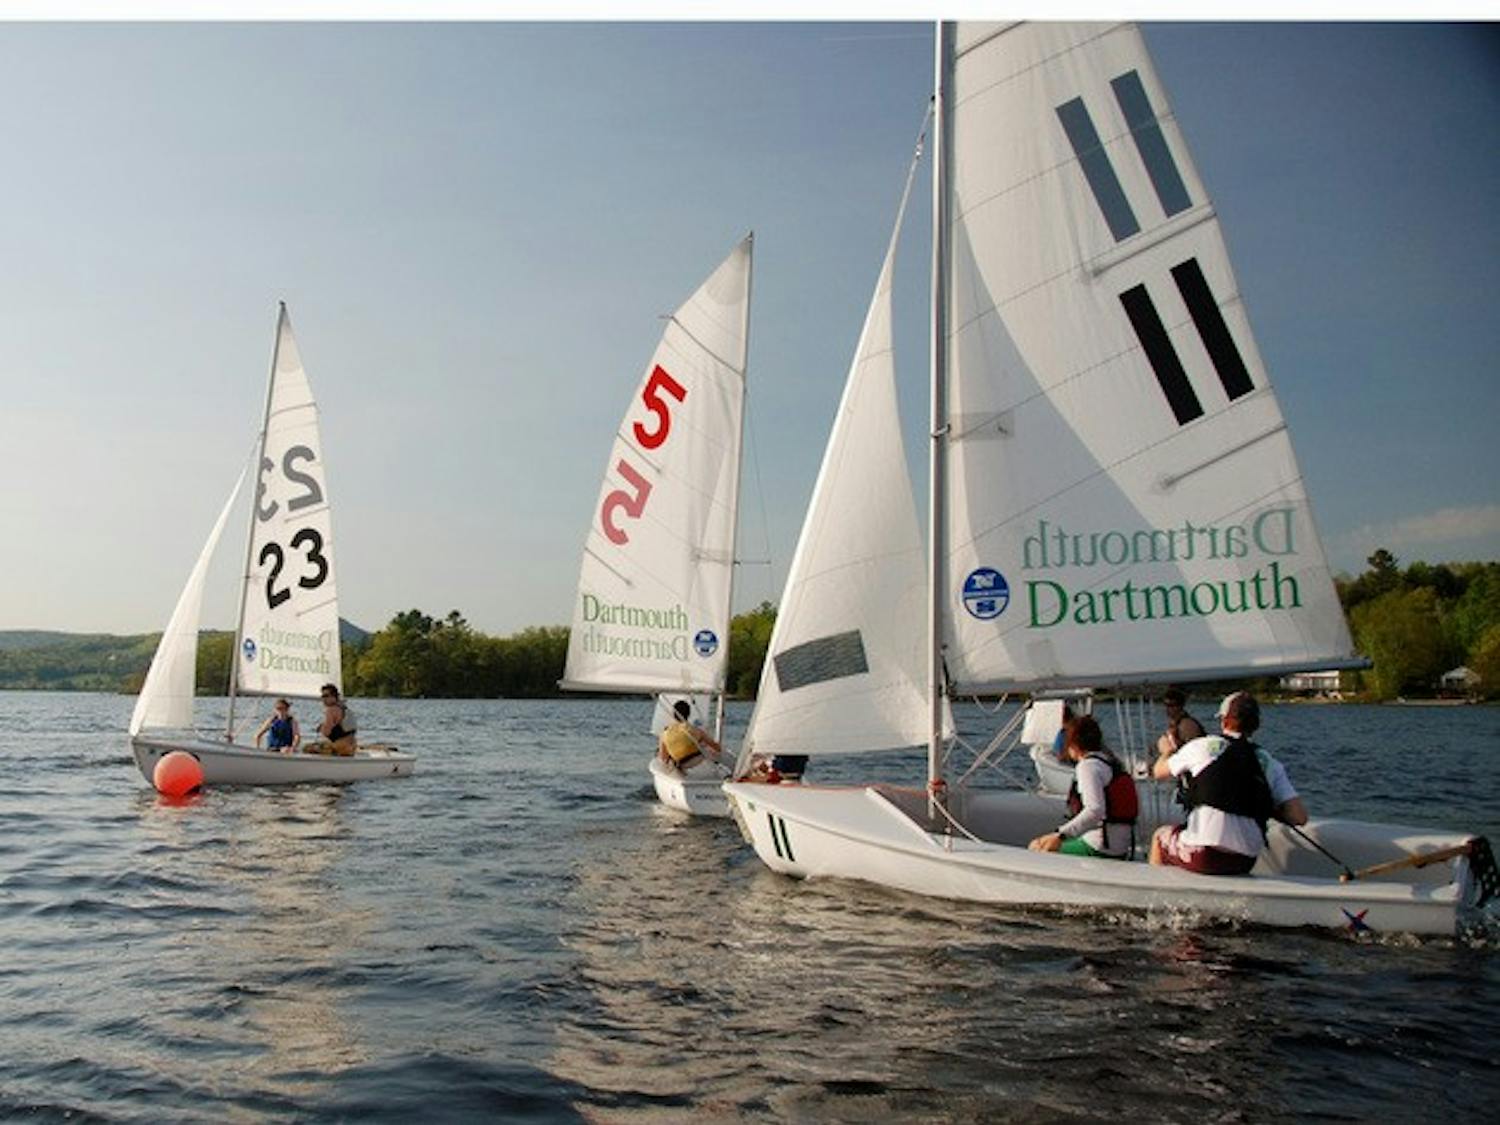 After the departure of last year's seniors like Erik Storck '07, sailing is in search of a new formula for success.